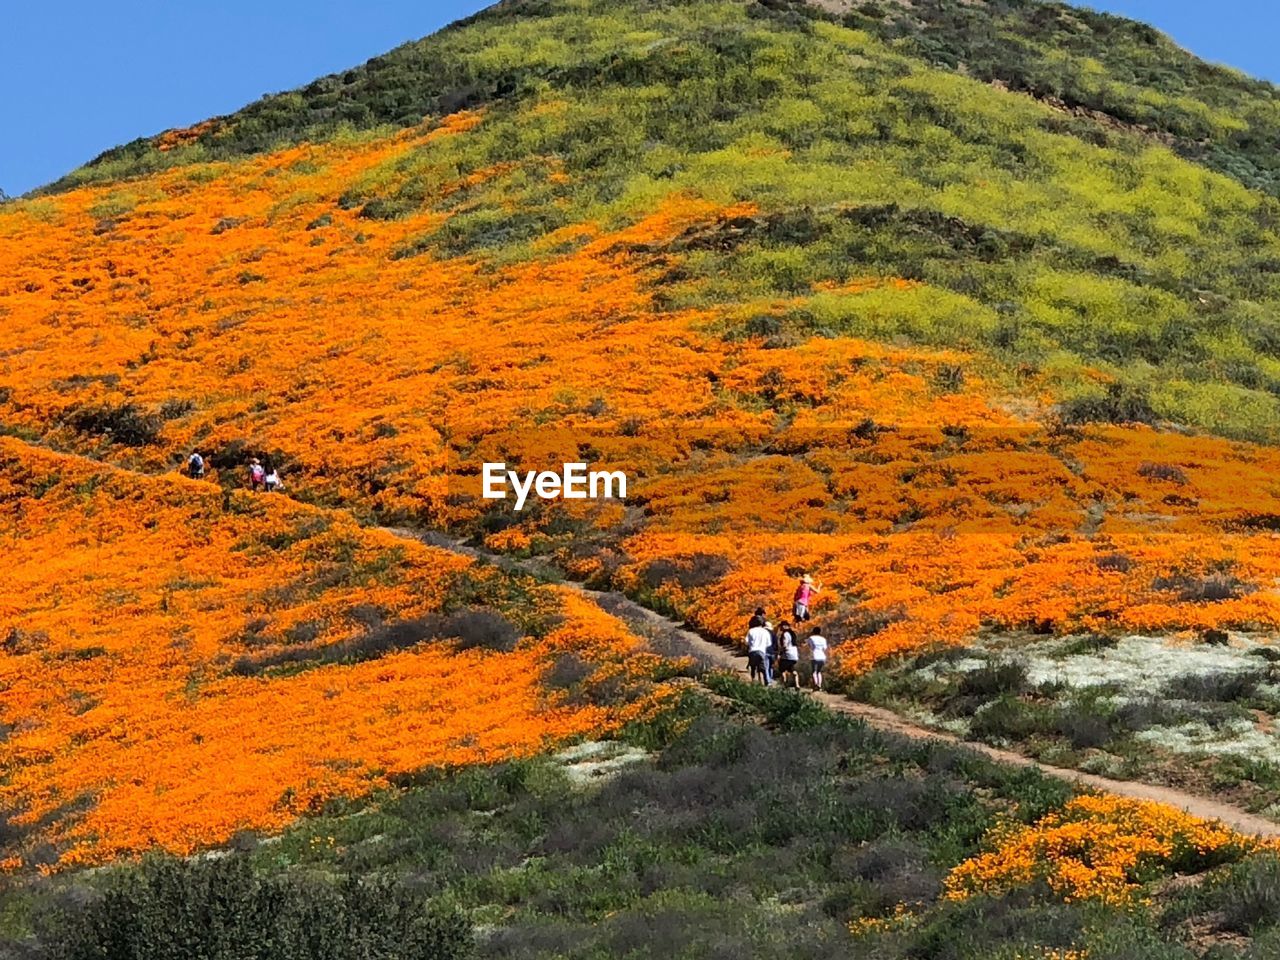 Poppies and wild flowers in bloom in southern california 